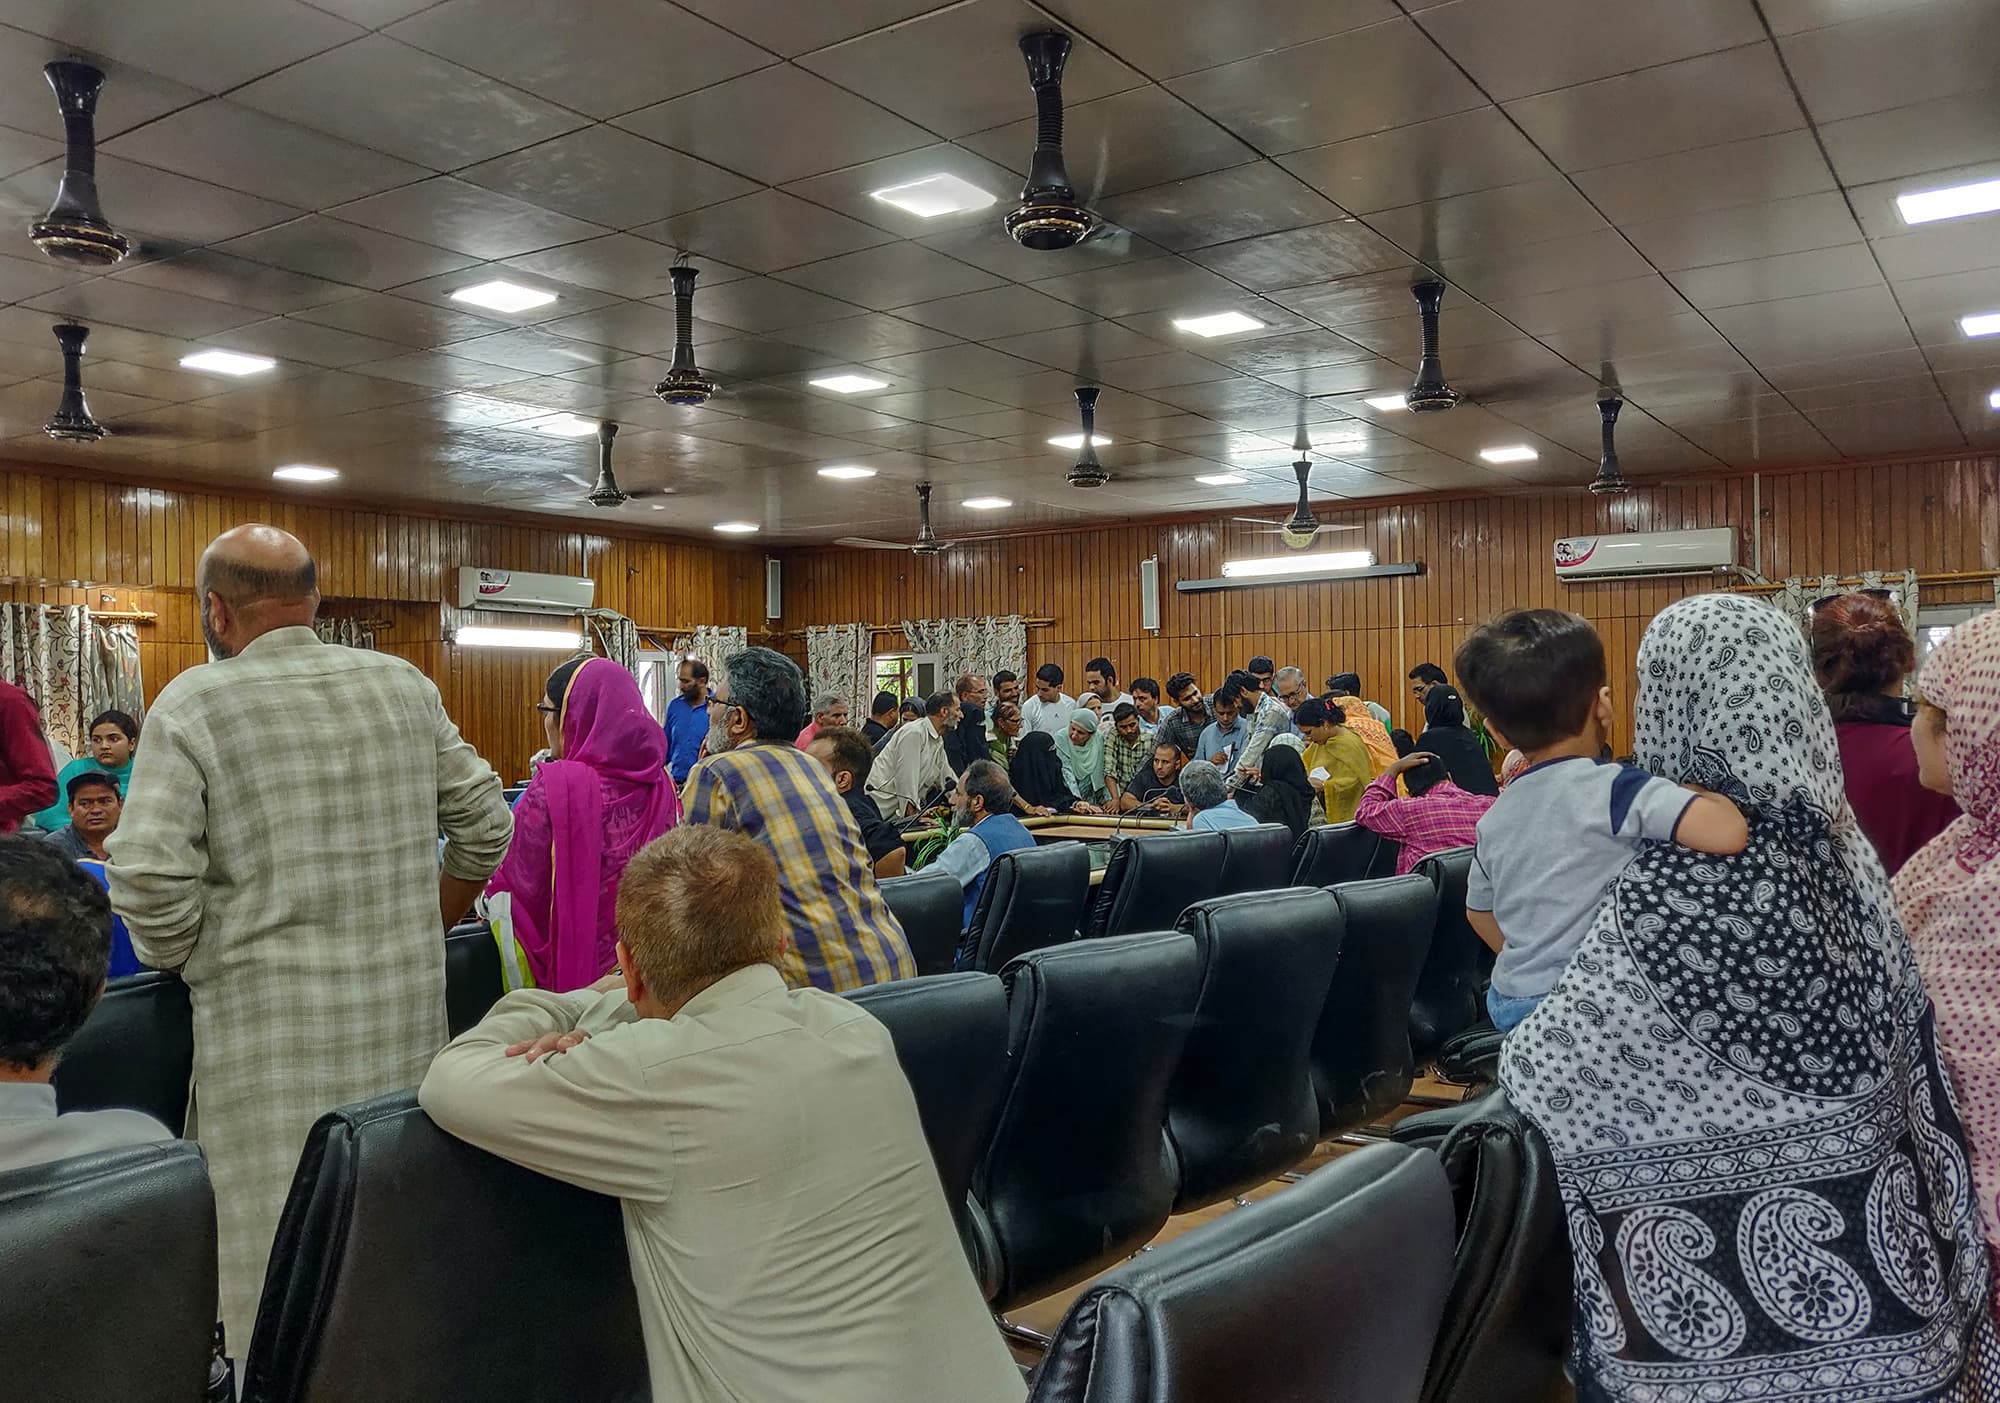 Kashmiris crowd around an official to use a phone at a goverment office, during restrictions after the scrapping of the special constitutional status for Kashmir by the government, in Srinagar August 10, 2019. REUTERS/Devjyot Ghoshal